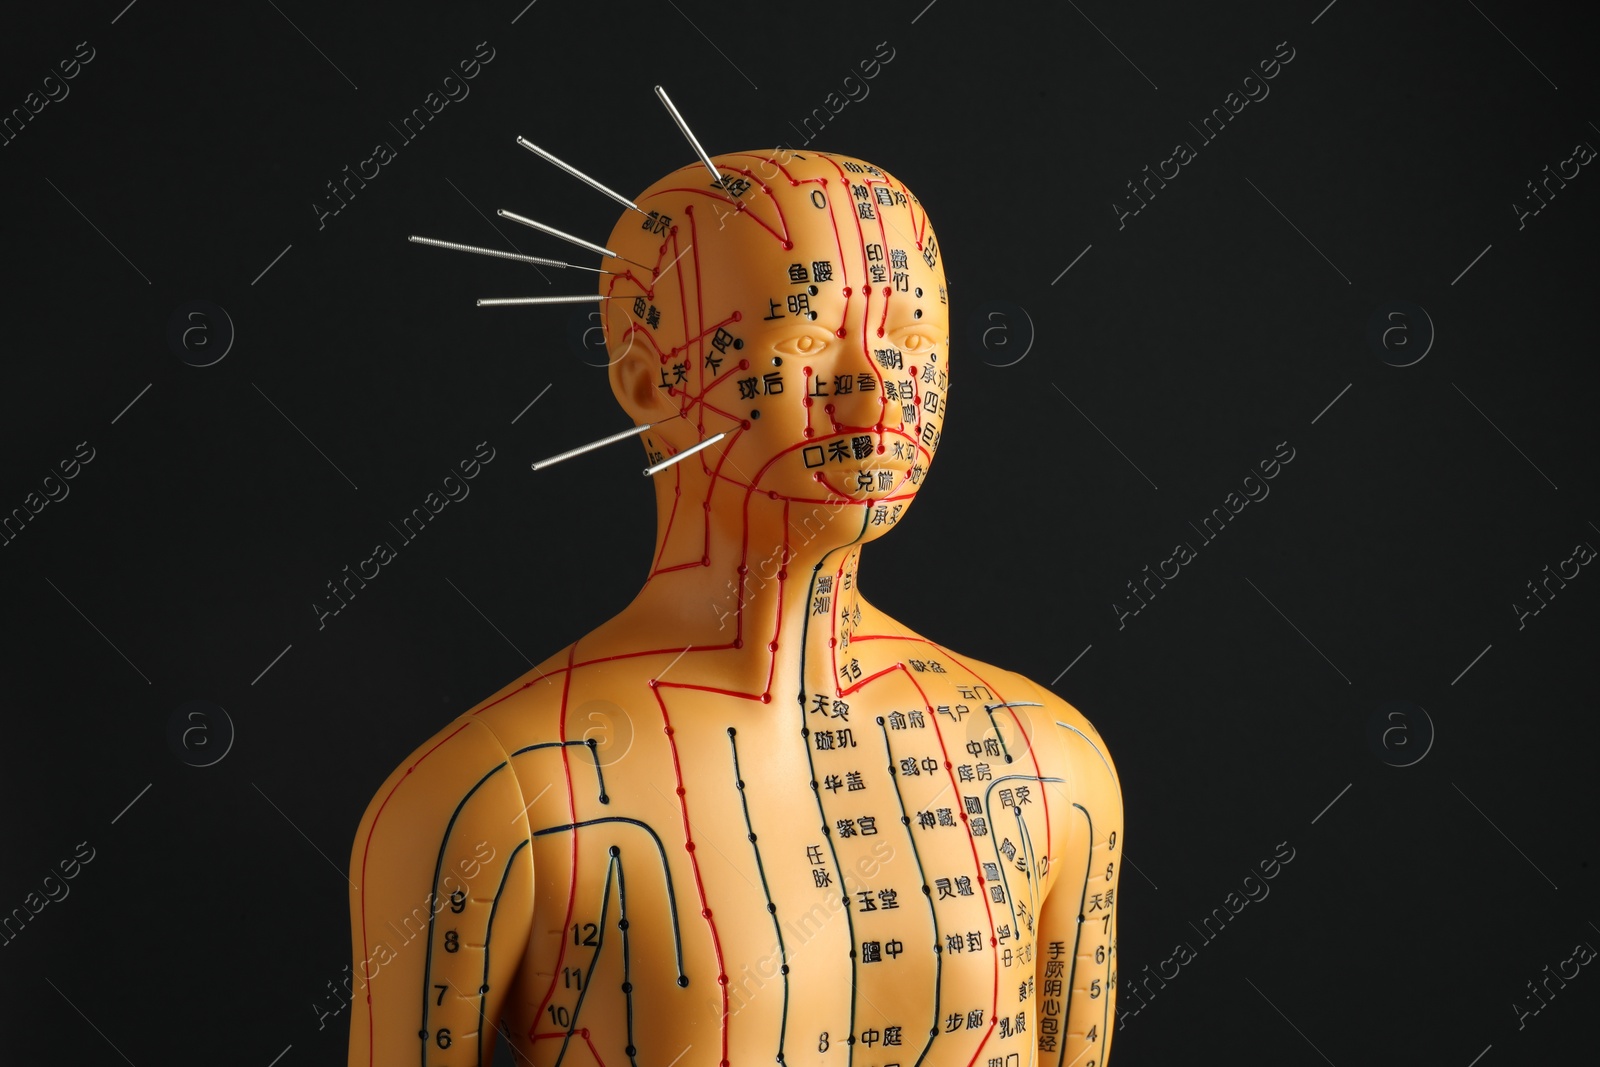 Photo of Acupuncture - alternative medicine. Human model with needles in head on black background